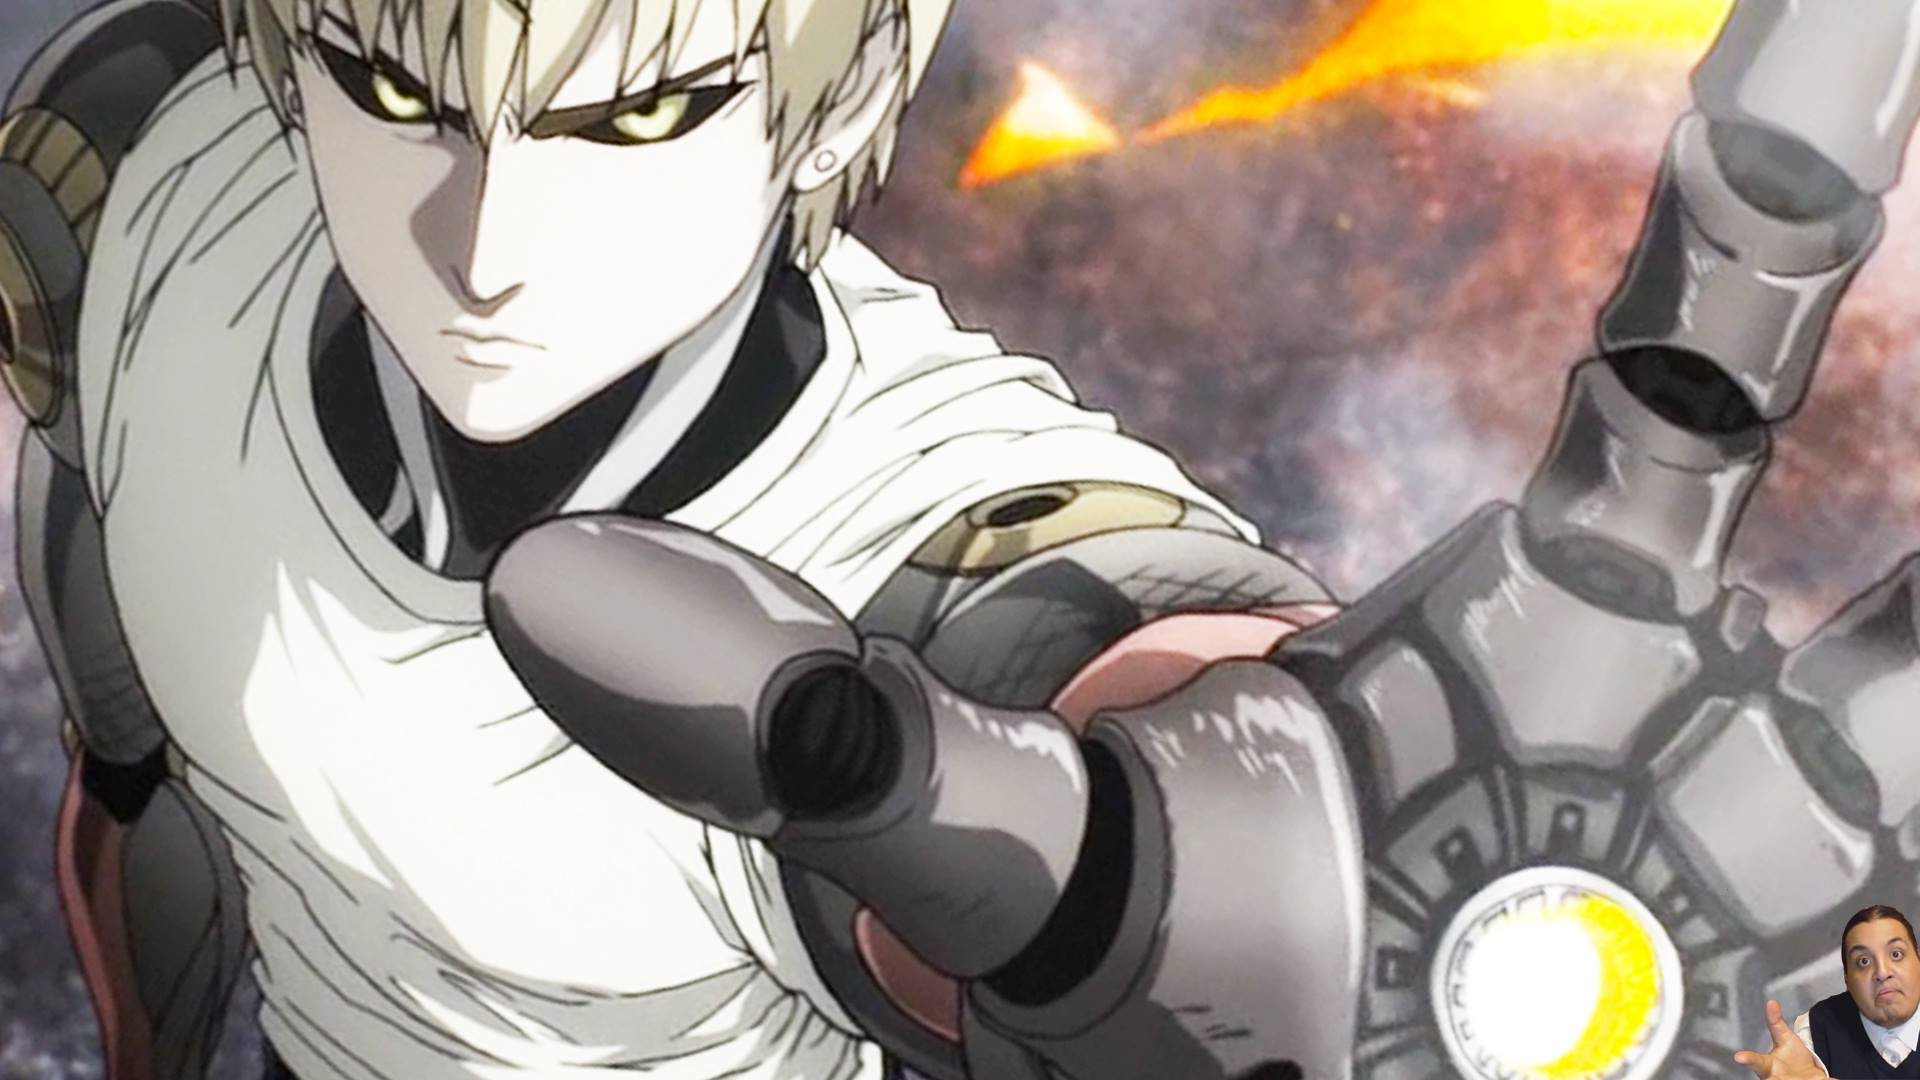 Free Download One Punch Man Genos 11 Hd Wallpaper Download 1920x1080 For Your Desktop Mobile Tablet Explore 48 One Punch Man Wallpaper 4k One Punch Man Desktop Wallpaper One - genos 2 roblox